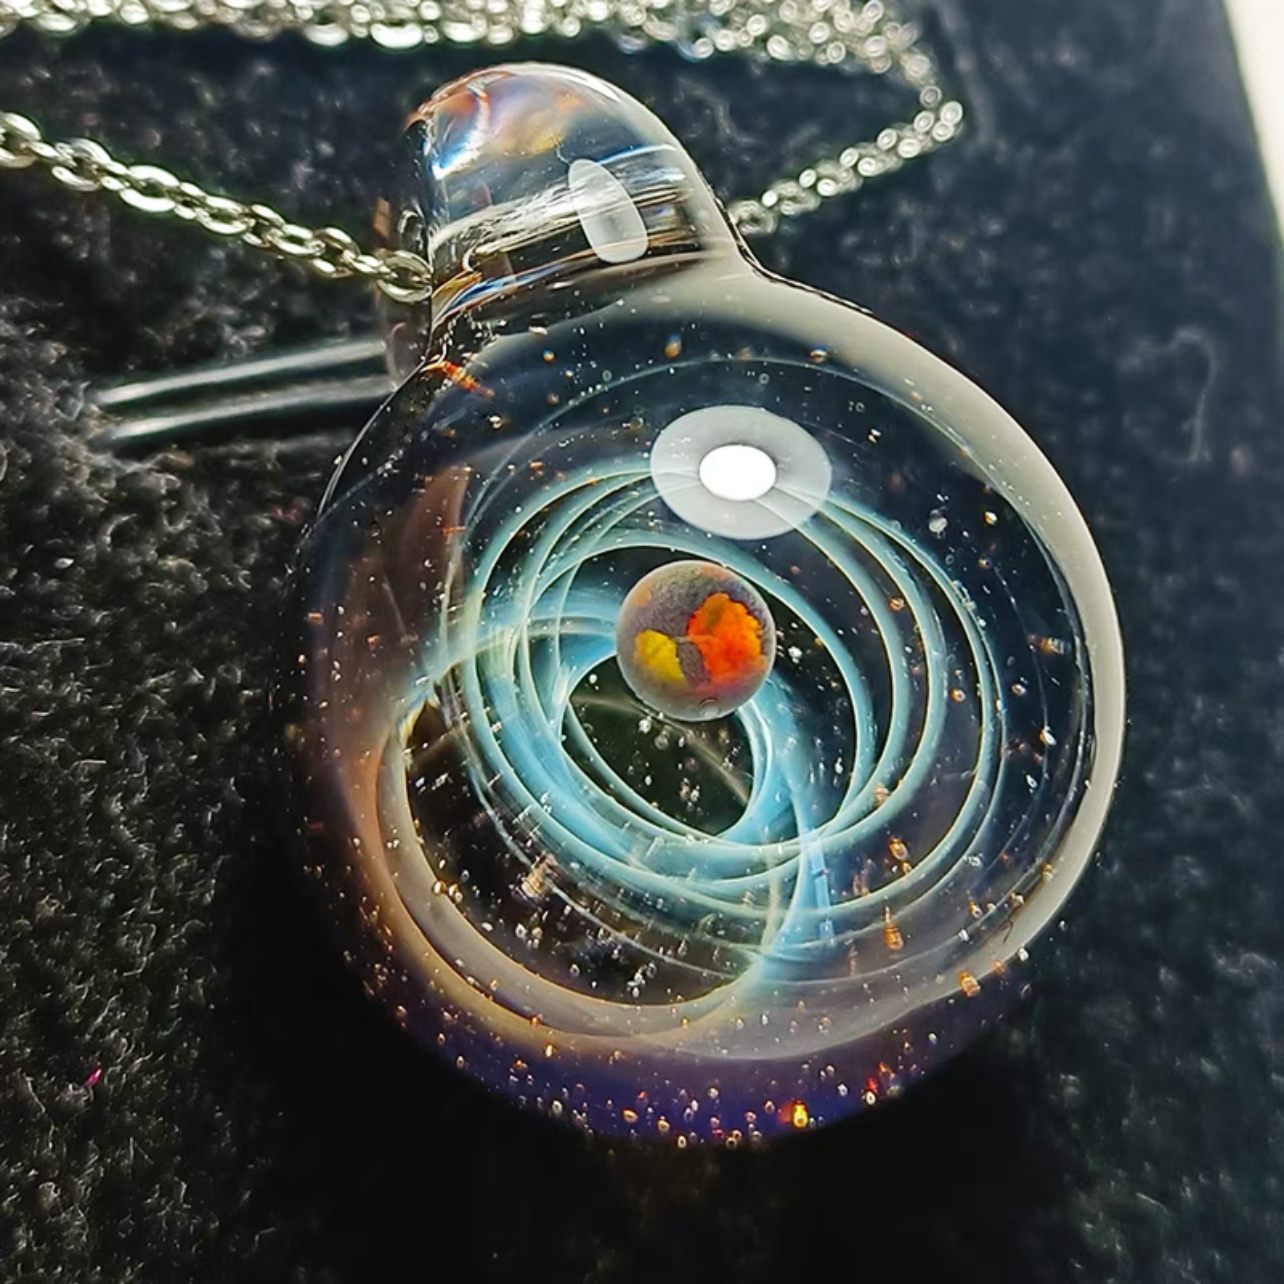 MOVTOYS Cosmic star glass necklace pendant lucite gift